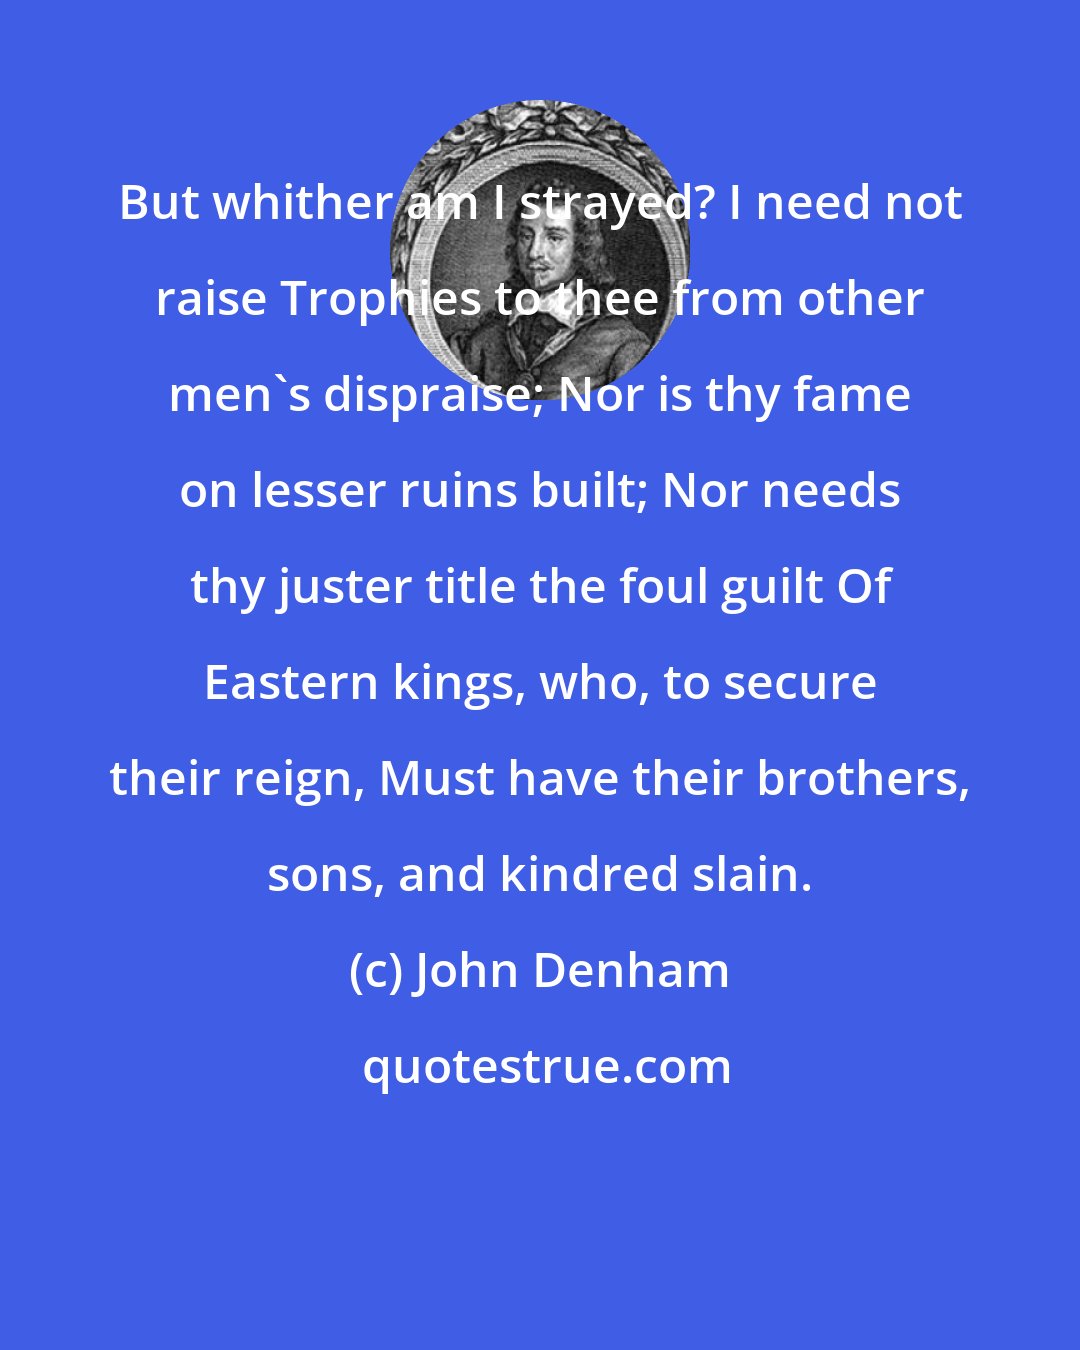 John Denham: But whither am I strayed? I need not raise Trophies to thee from other men's dispraise; Nor is thy fame on lesser ruins built; Nor needs thy juster title the foul guilt Of Eastern kings, who, to secure their reign, Must have their brothers, sons, and kindred slain.